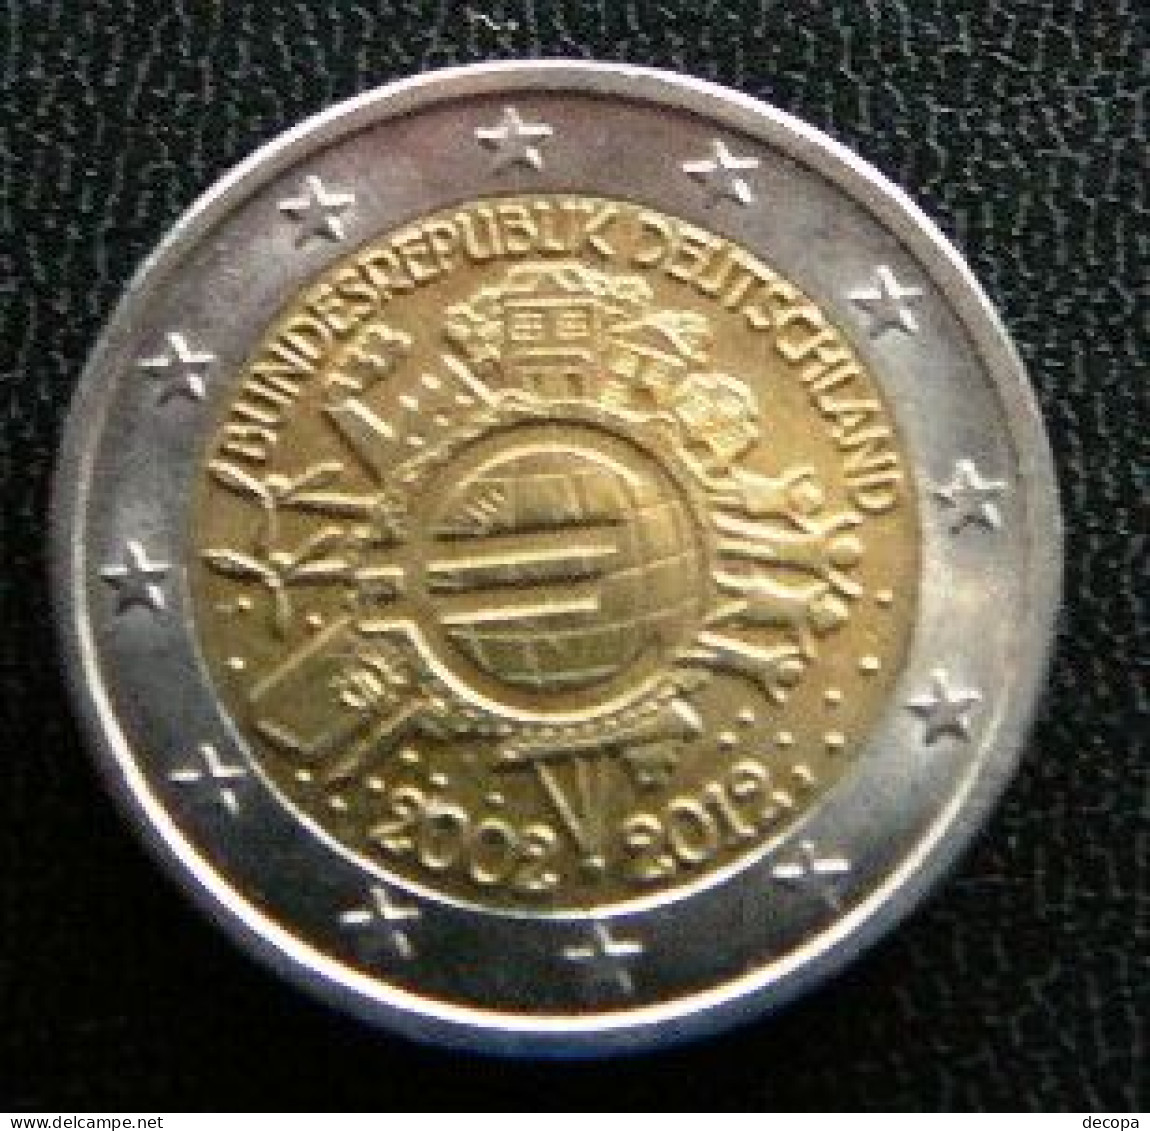 Germany - Allemagne - Duitsland   2 EURO 2012 J   10 Years Euro      Speciale Uitgave - Commemorative - Germania